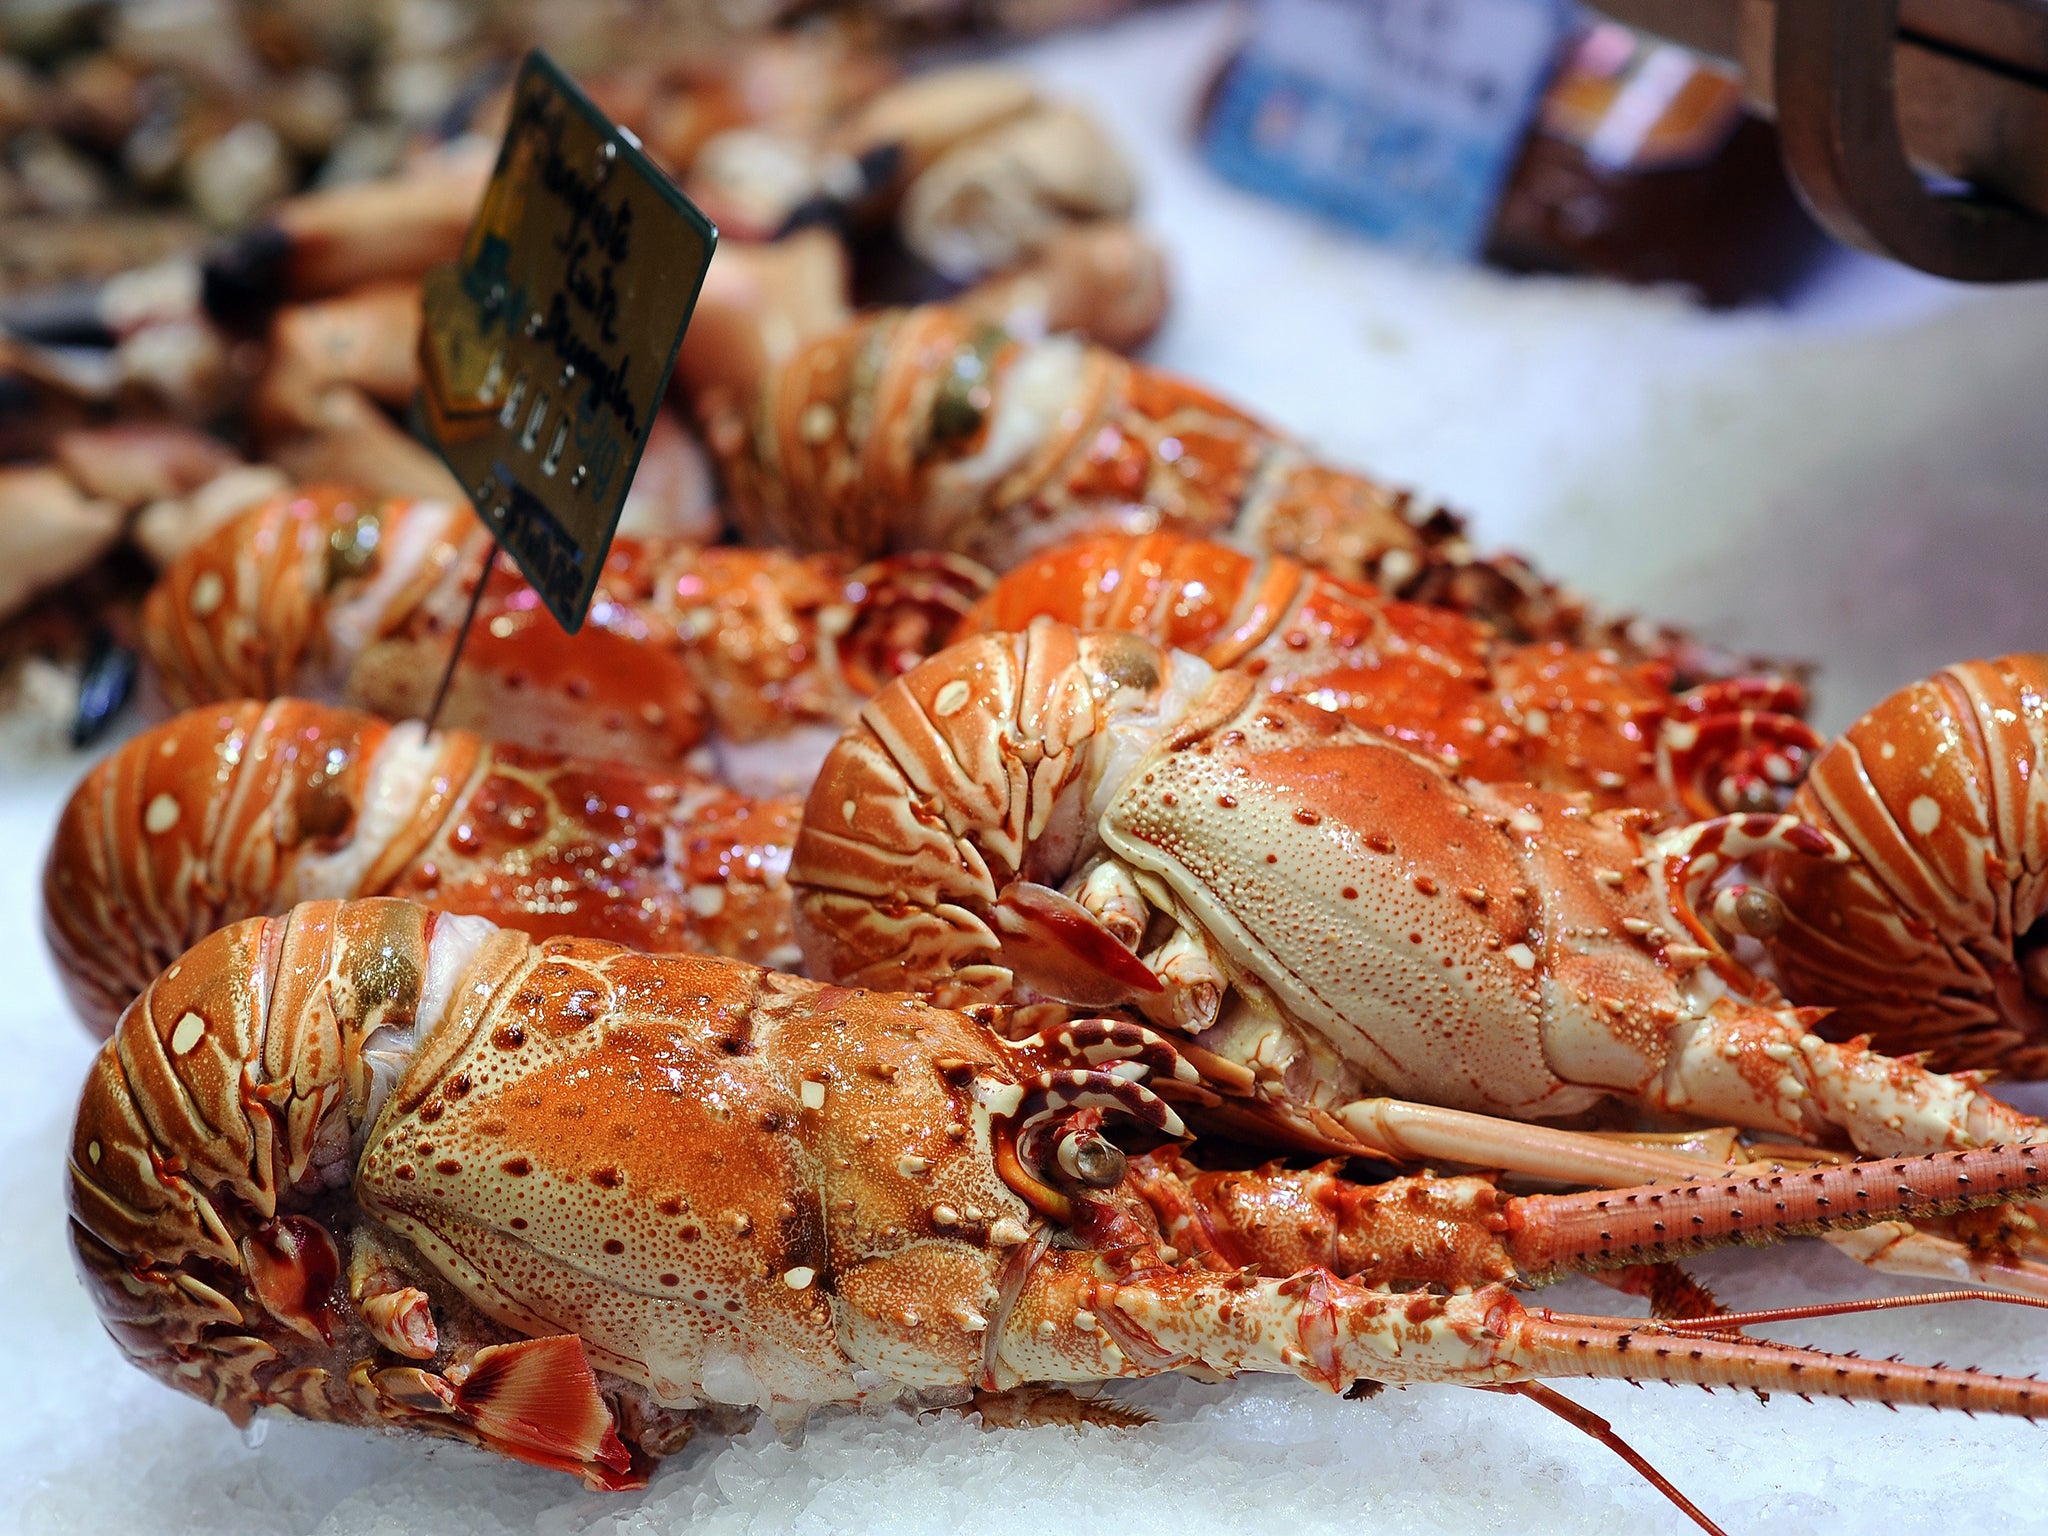 Worth shelling out for: Atlantic lobsters are especially
meaty